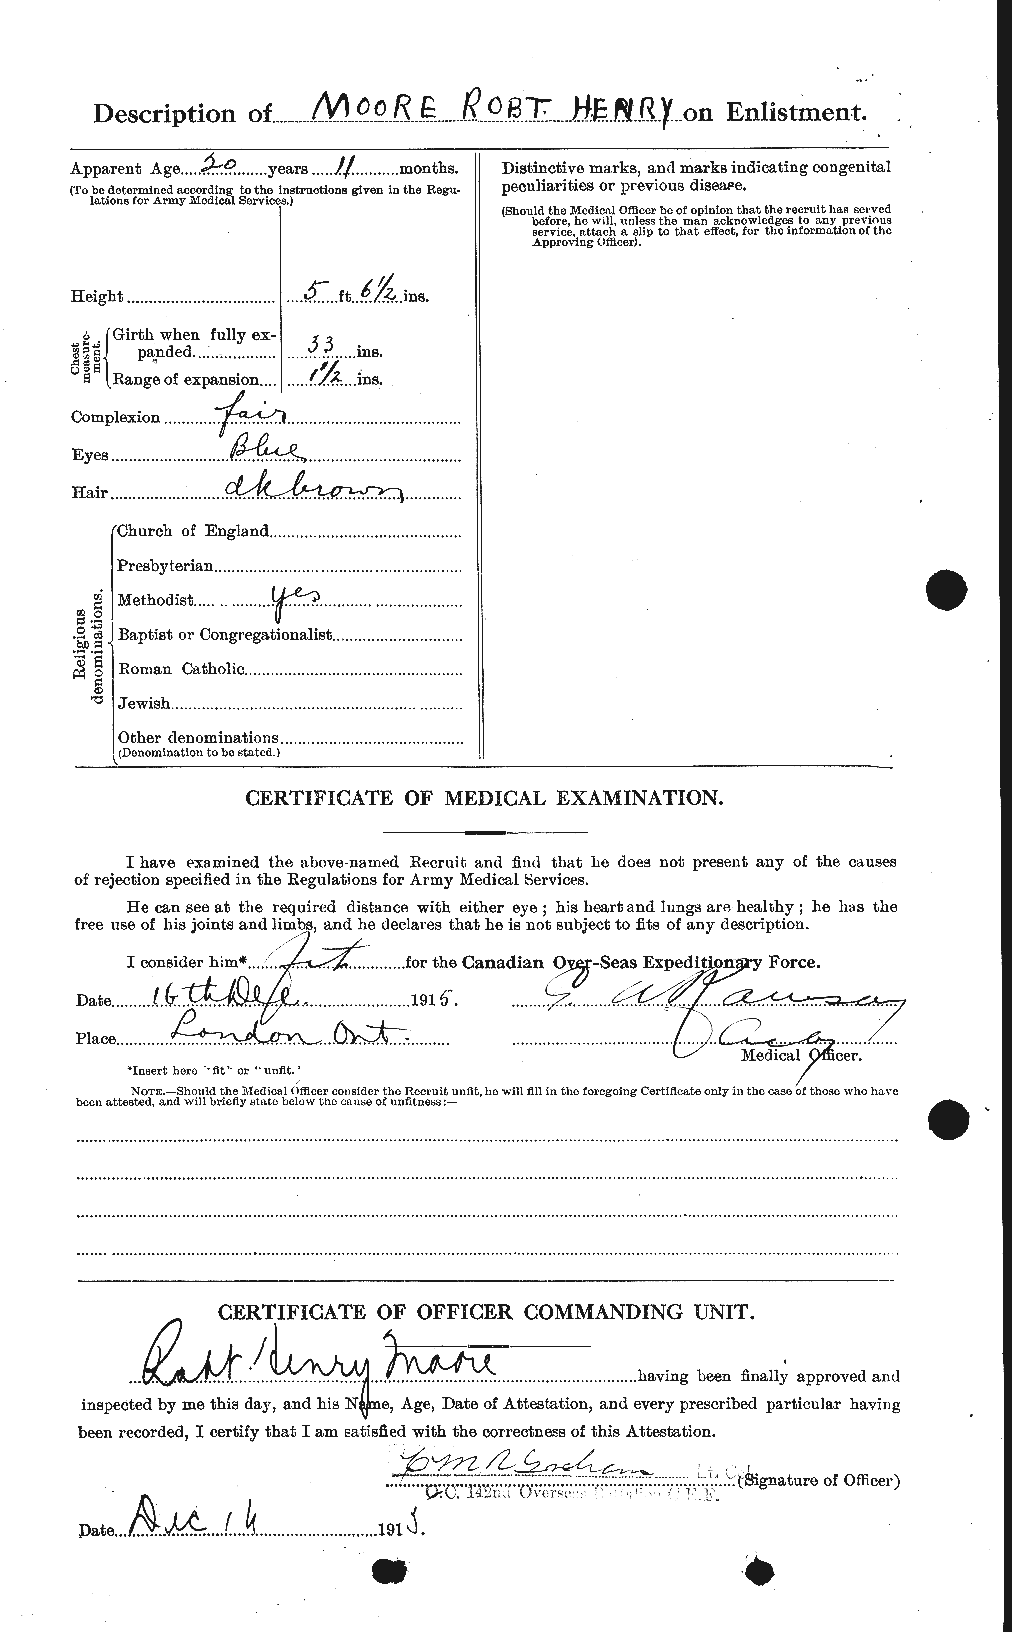 Personnel Records of the First World War - CEF 503570b